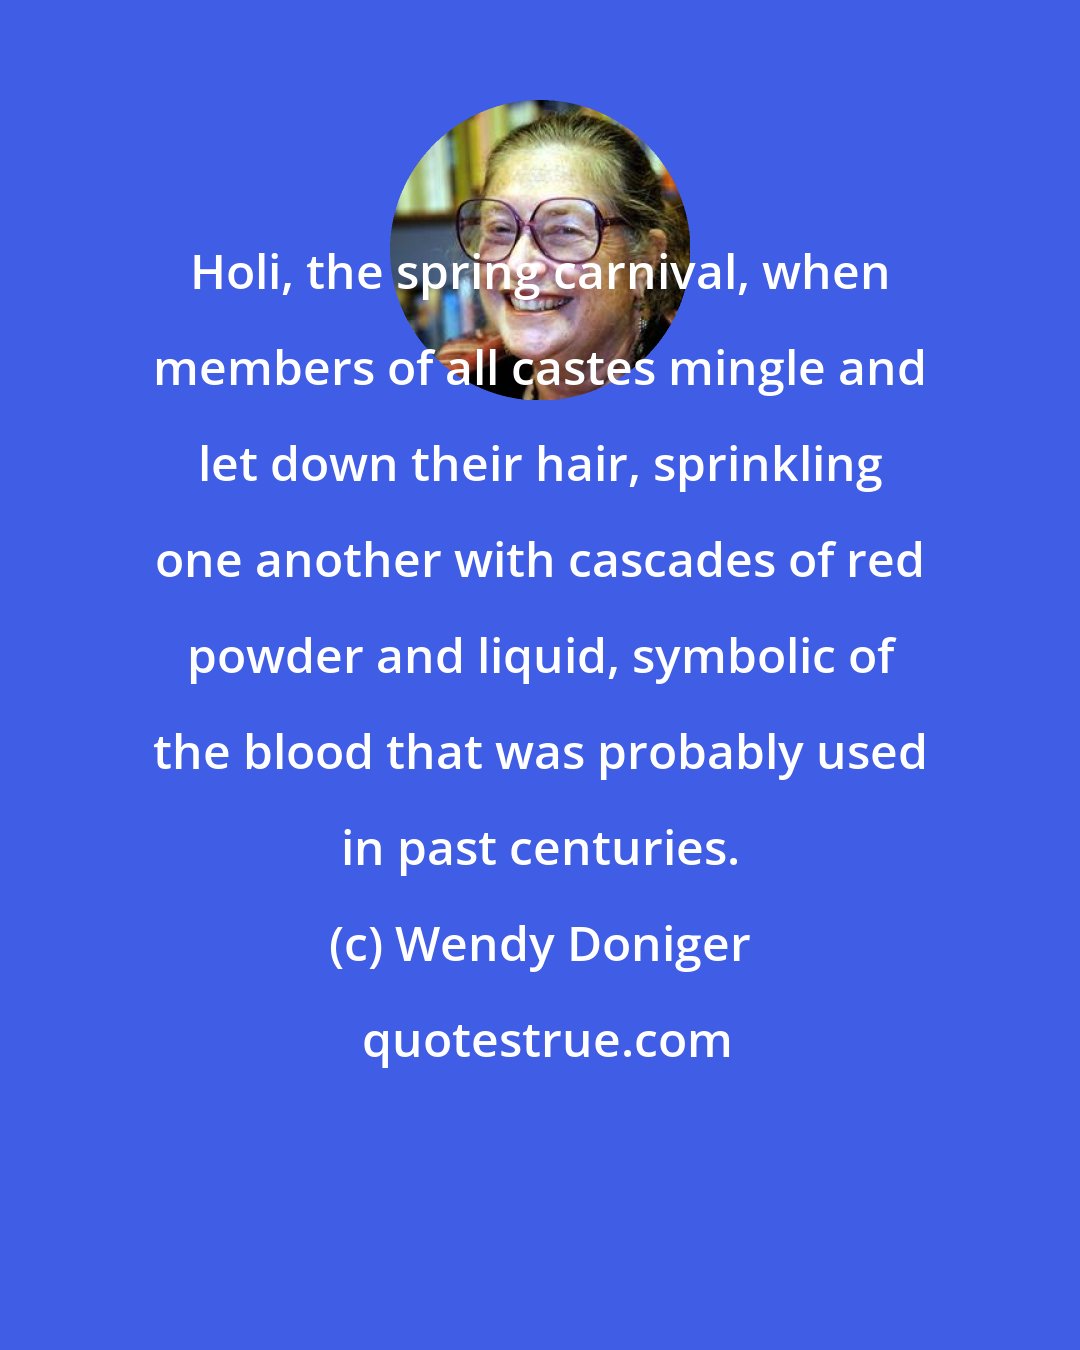 Wendy Doniger: Holi, the spring carnival, when members of all castes mingle and let down their hair, sprinkling one another with cascades of red powder and liquid, symbolic of the blood that was probably used in past centuries.